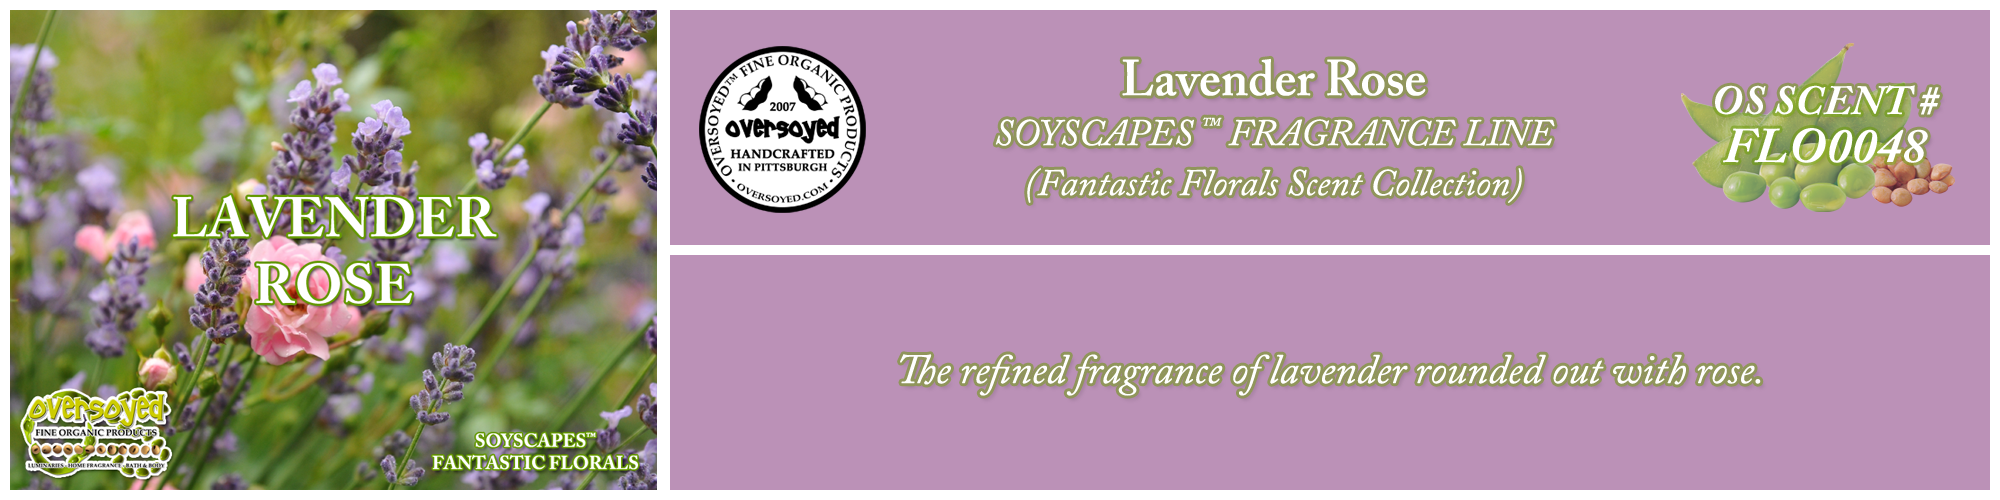 Lavender Rose Handcrafted Products Collection